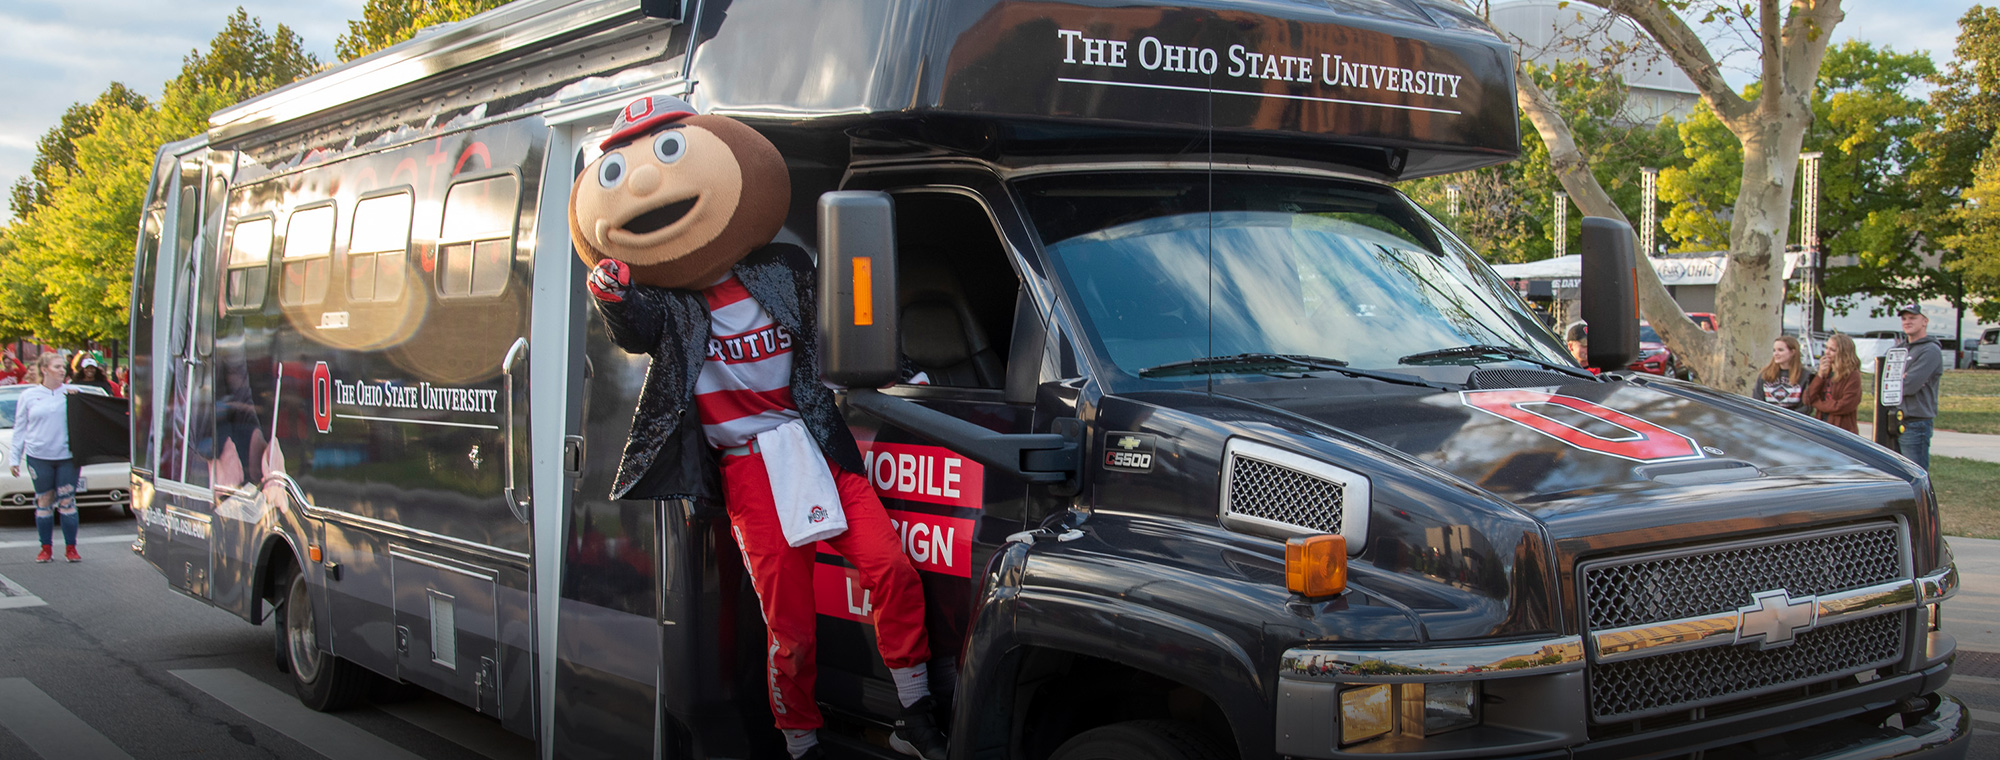 Brutus on Mobile Design Lab in a parade